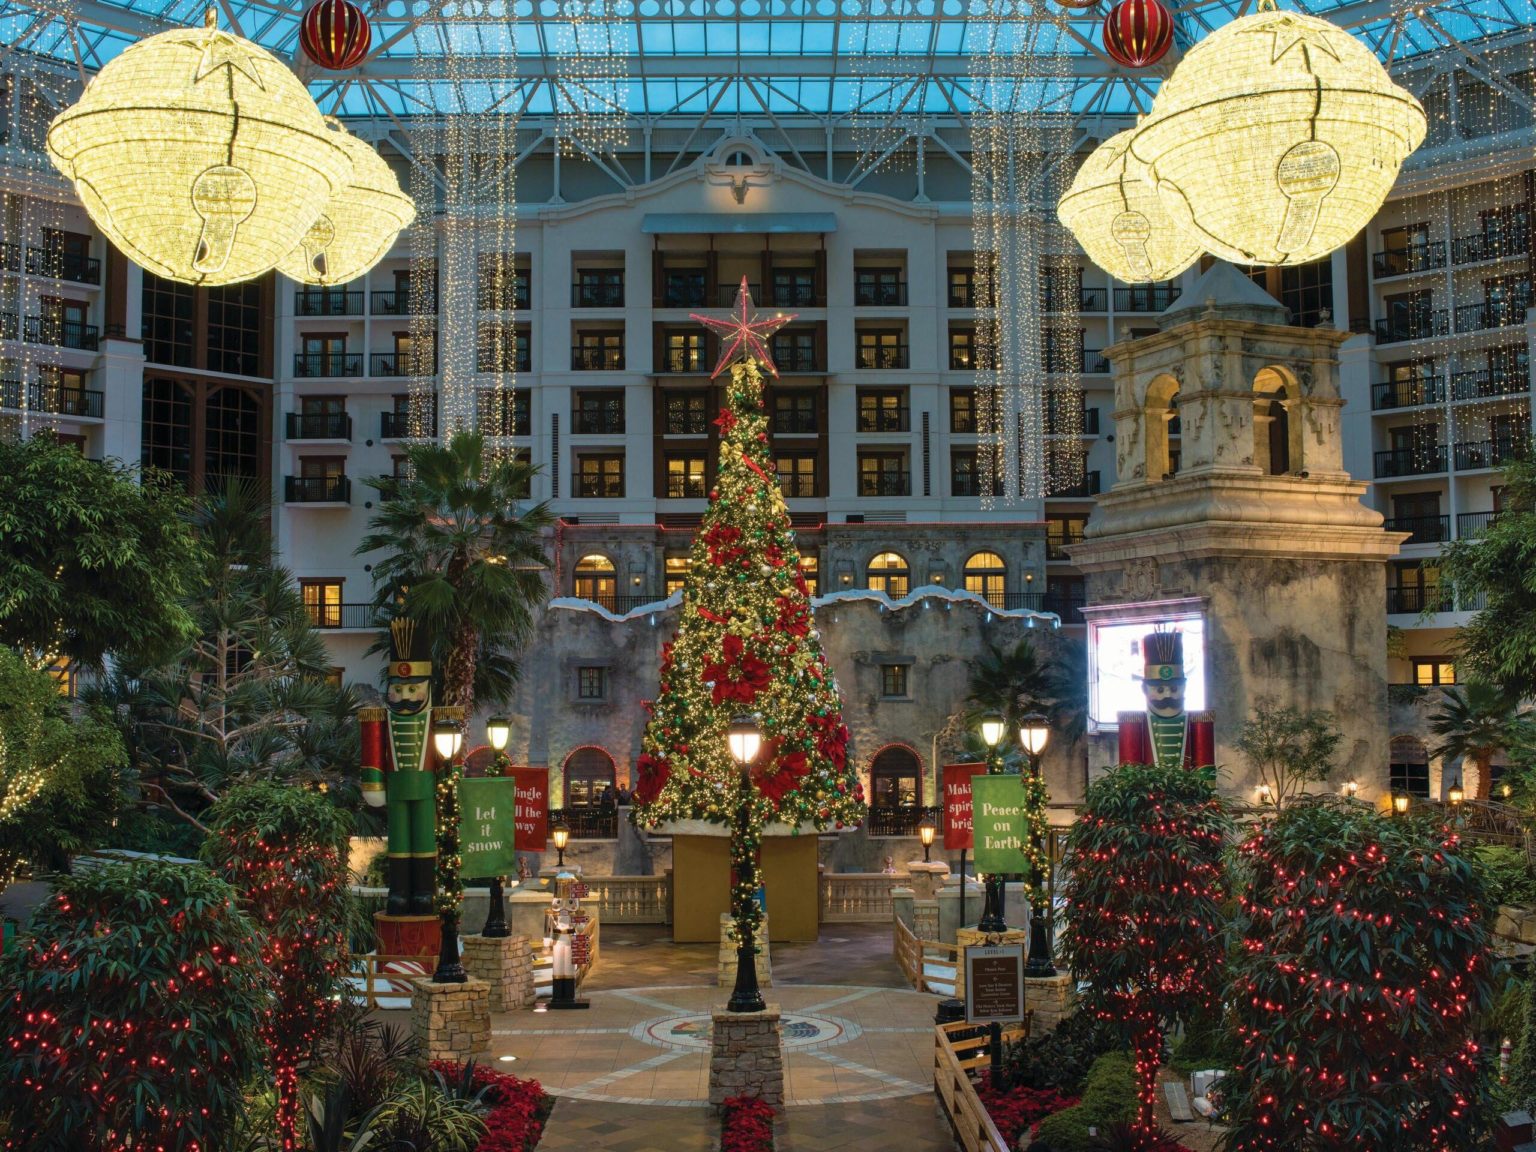 Texas resorts and hotels are offering unique, festive experiences this holiday season.